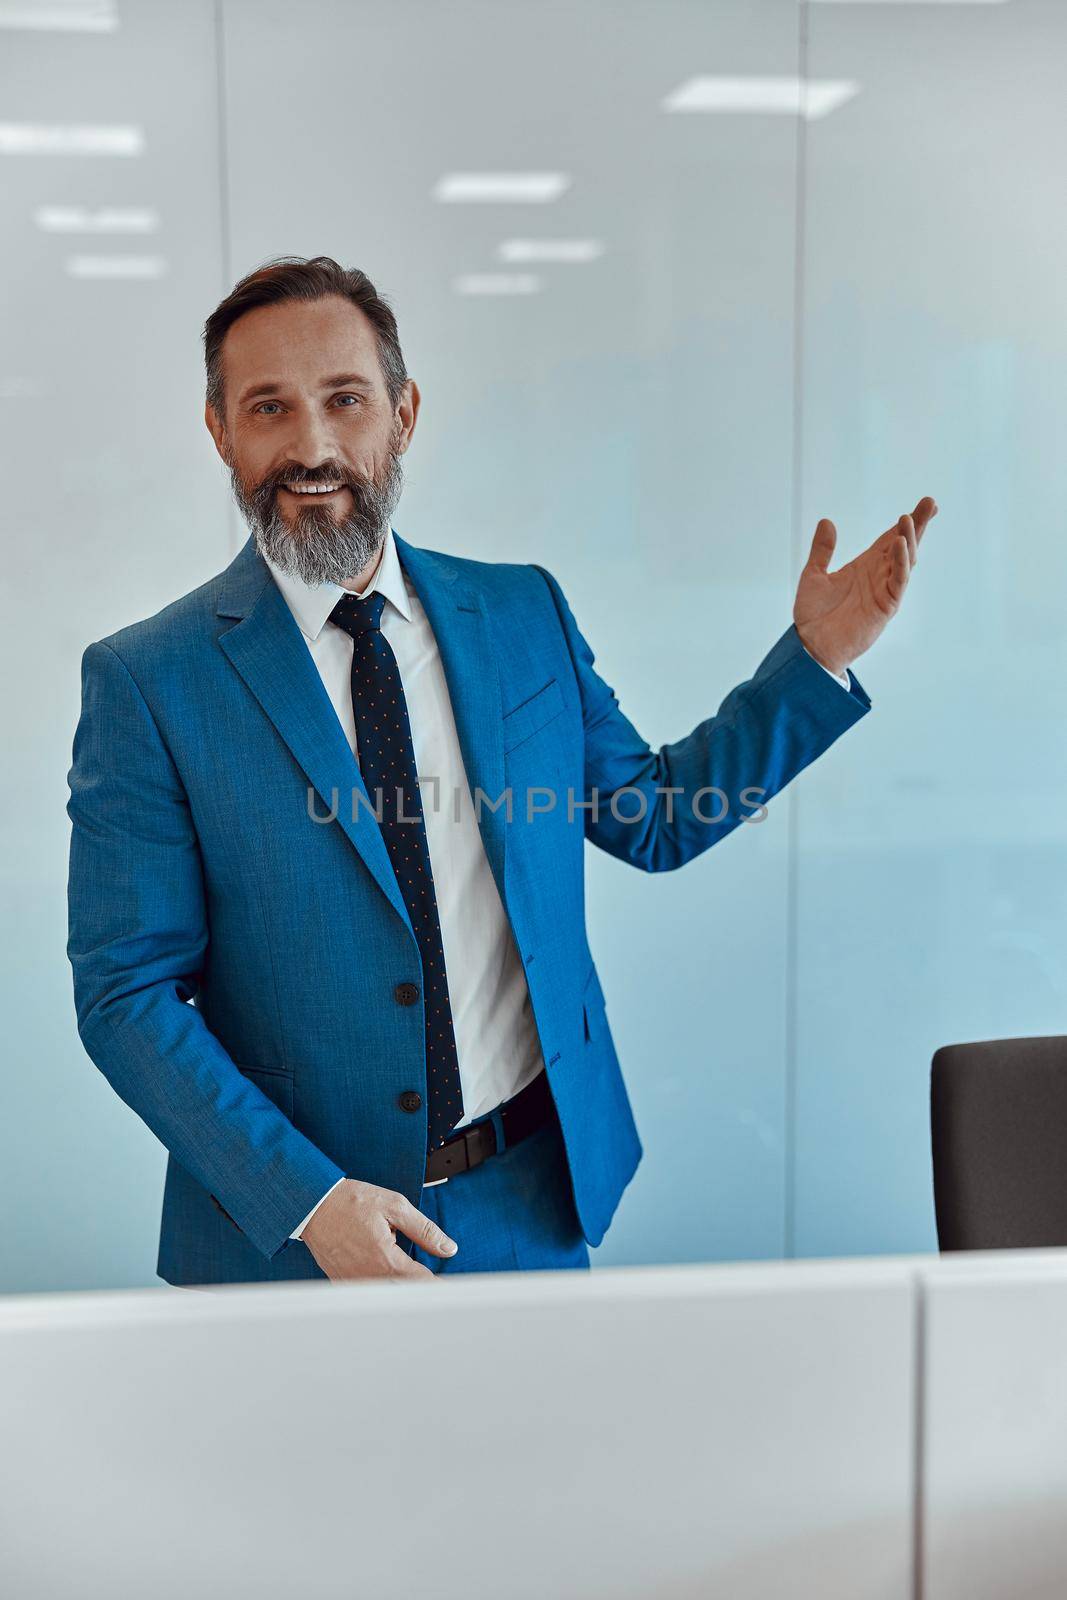 Caucasian handsome intelligence successful businessman in formal suit standing against white wall, copy space